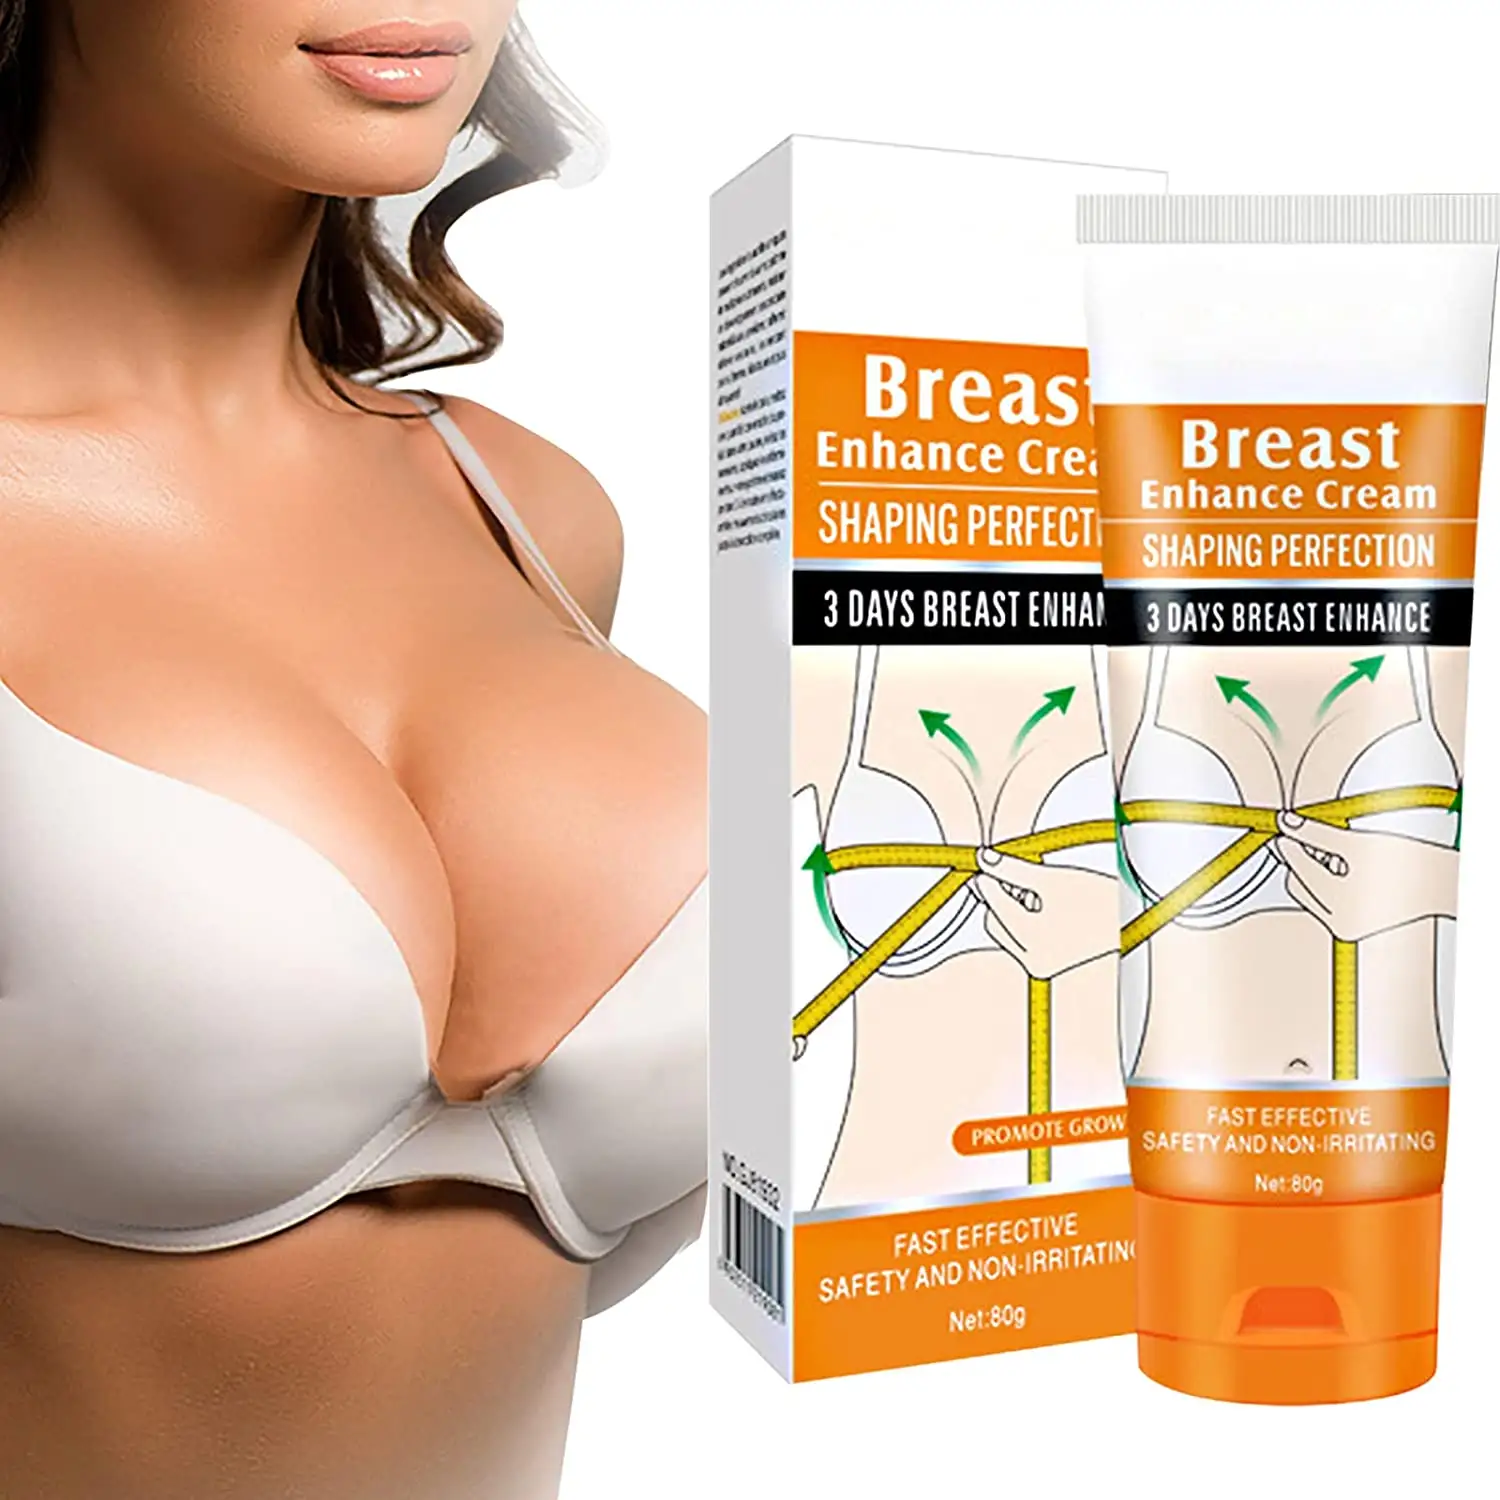 Enhancement cream for Boobs Lift Tightening Firming Fast Enlargement Big breast cream firming enlargement with herbal